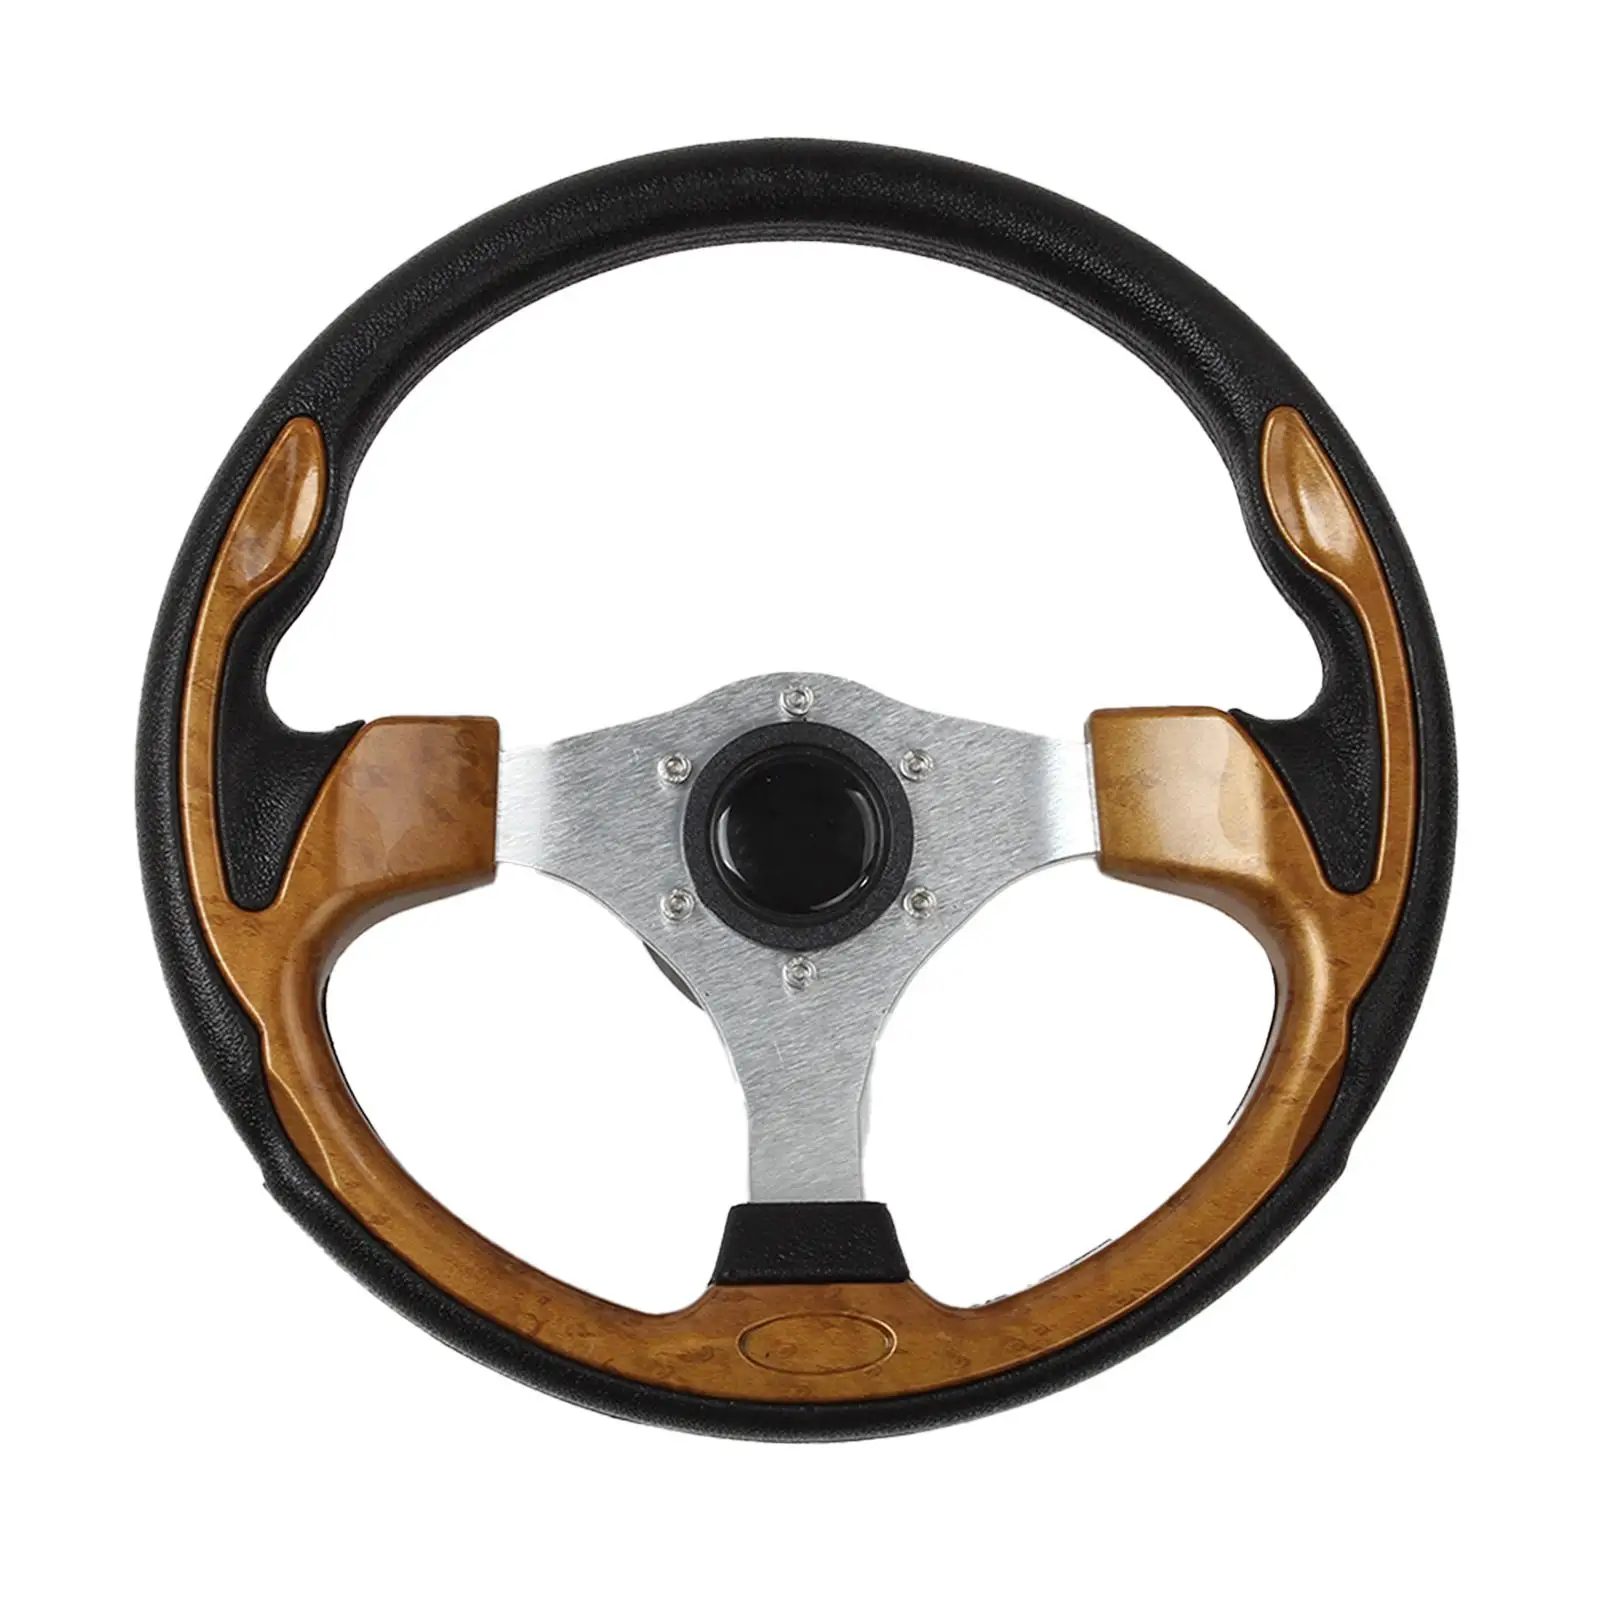 Marine Boat Steering Wheel Fine Workmanship Convenient Assemble Accessory Durable 3 Spoke for Marine Boats Yachts Devices brand convenient print head accessory simple operation sturdy durable indispensable metal plastic print scan